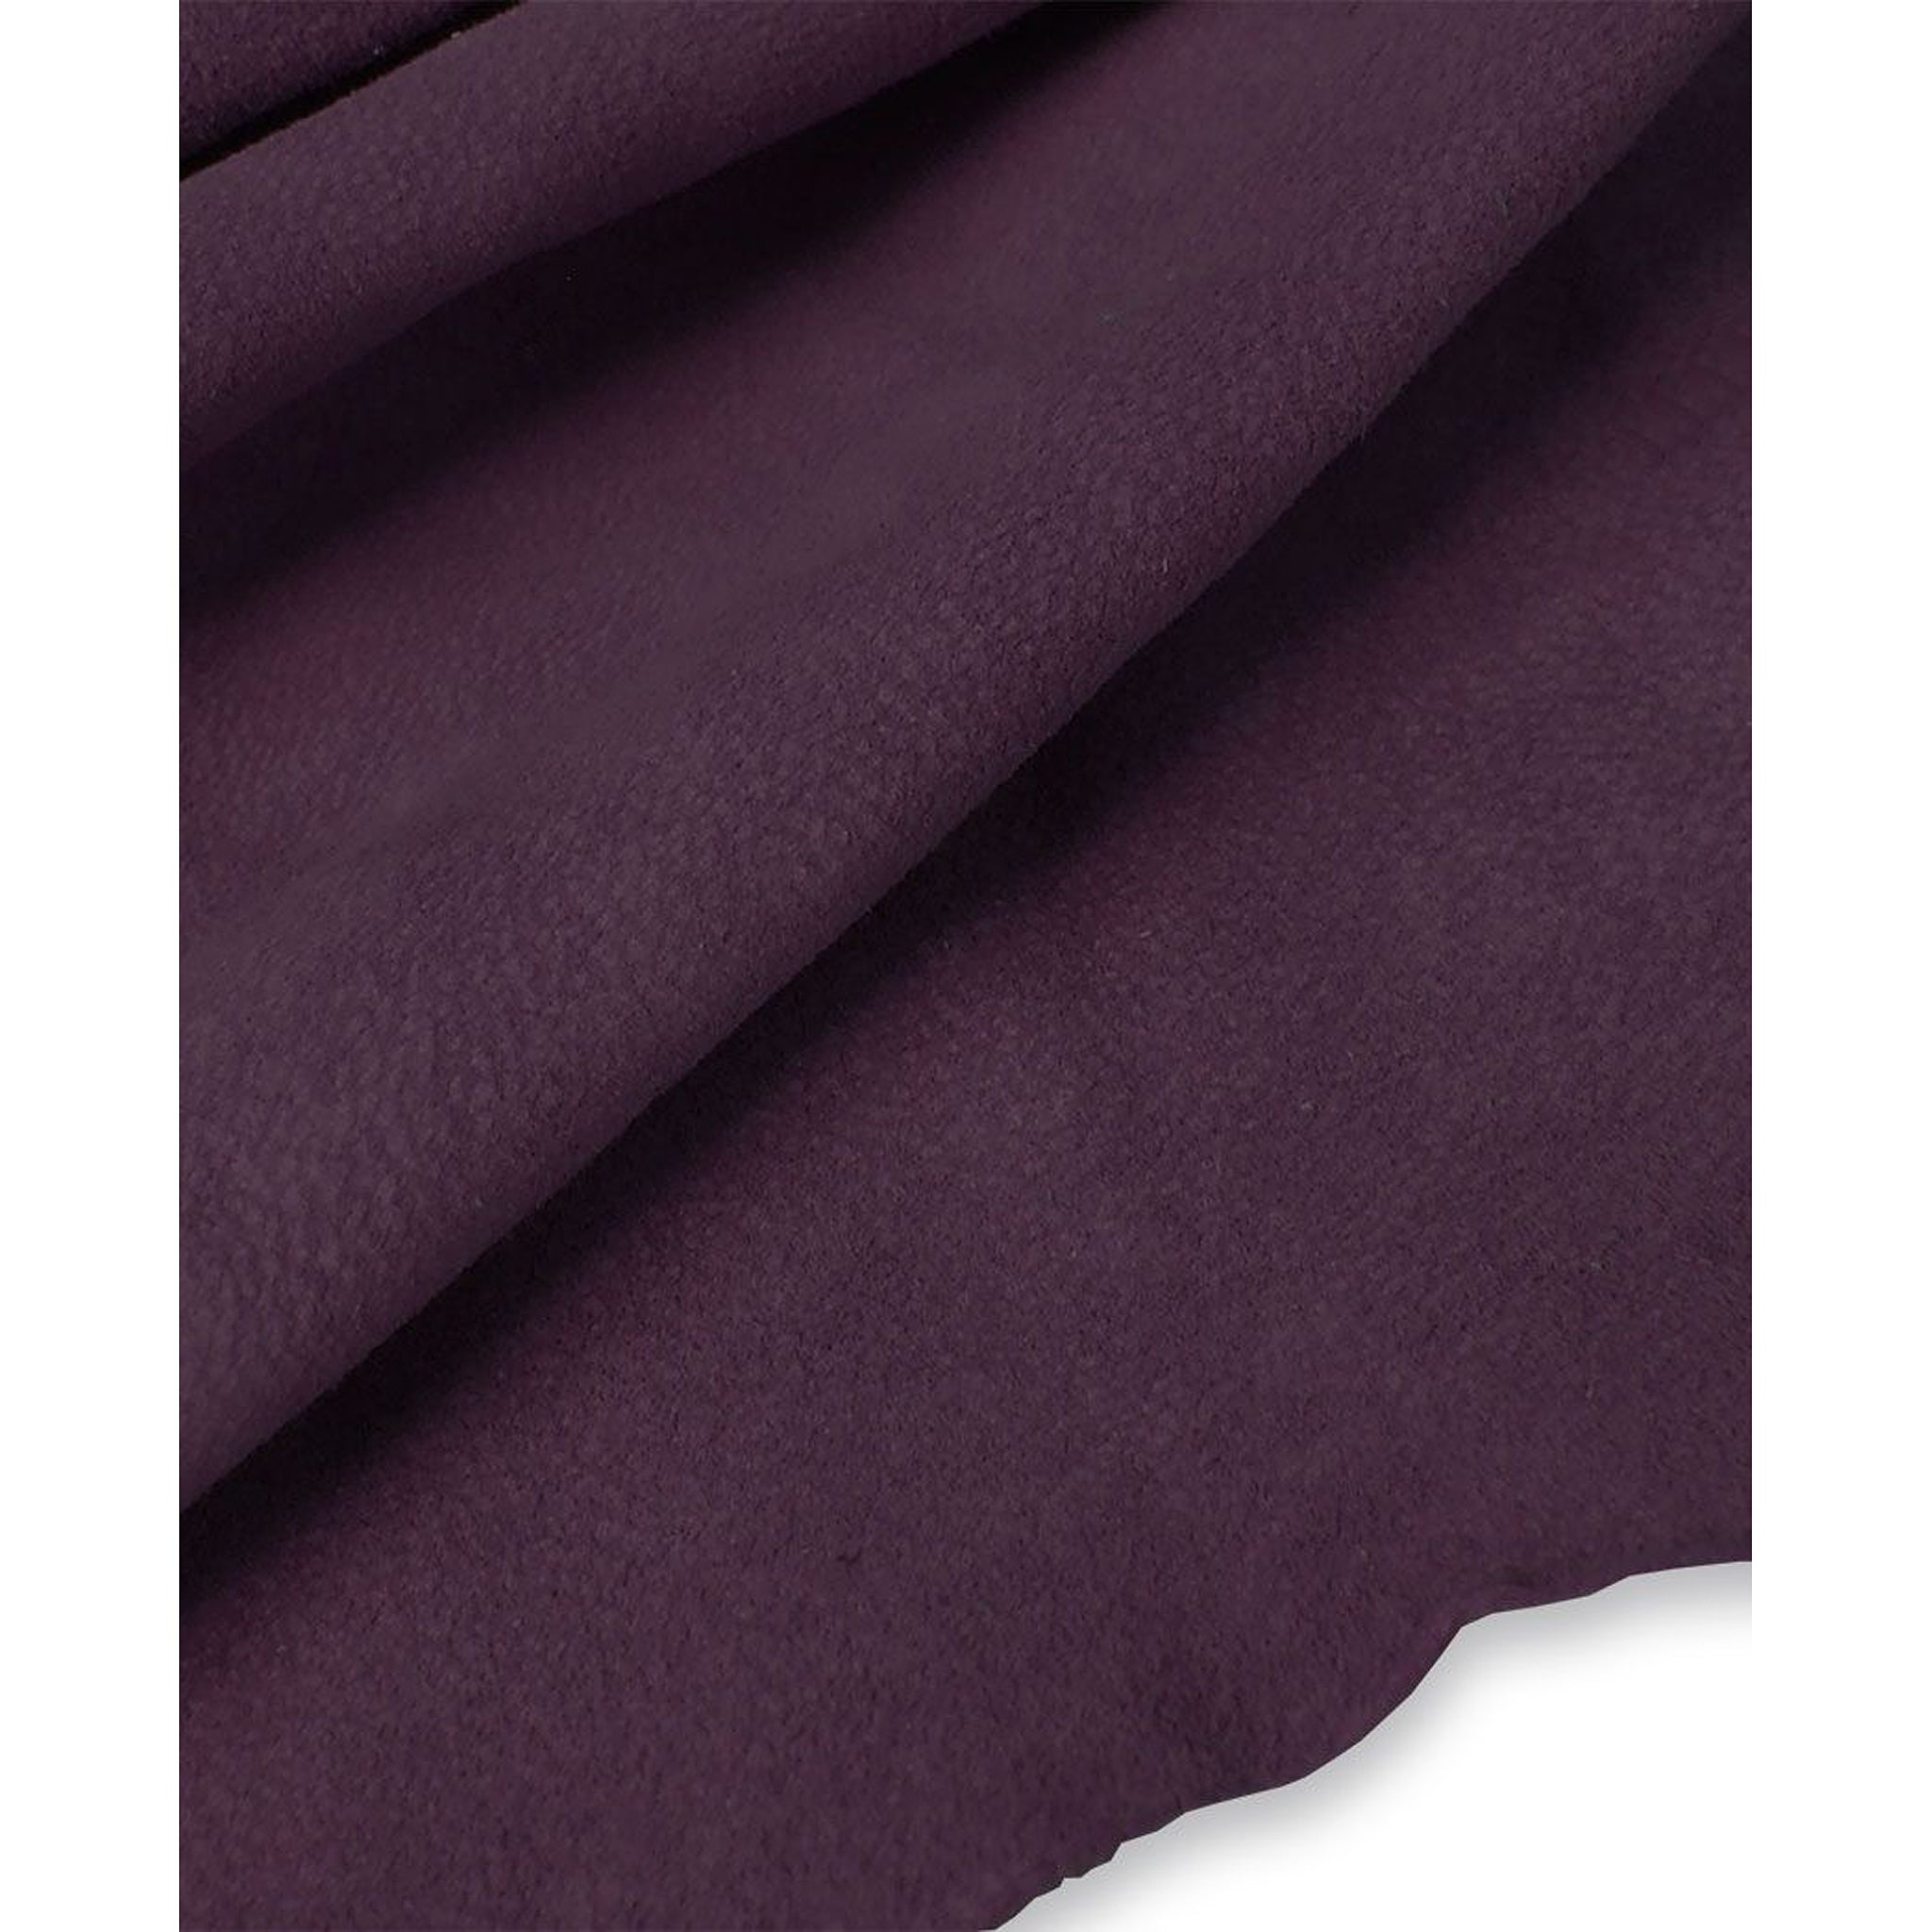 Aubergine Pig Suede from Identity Leathercraft